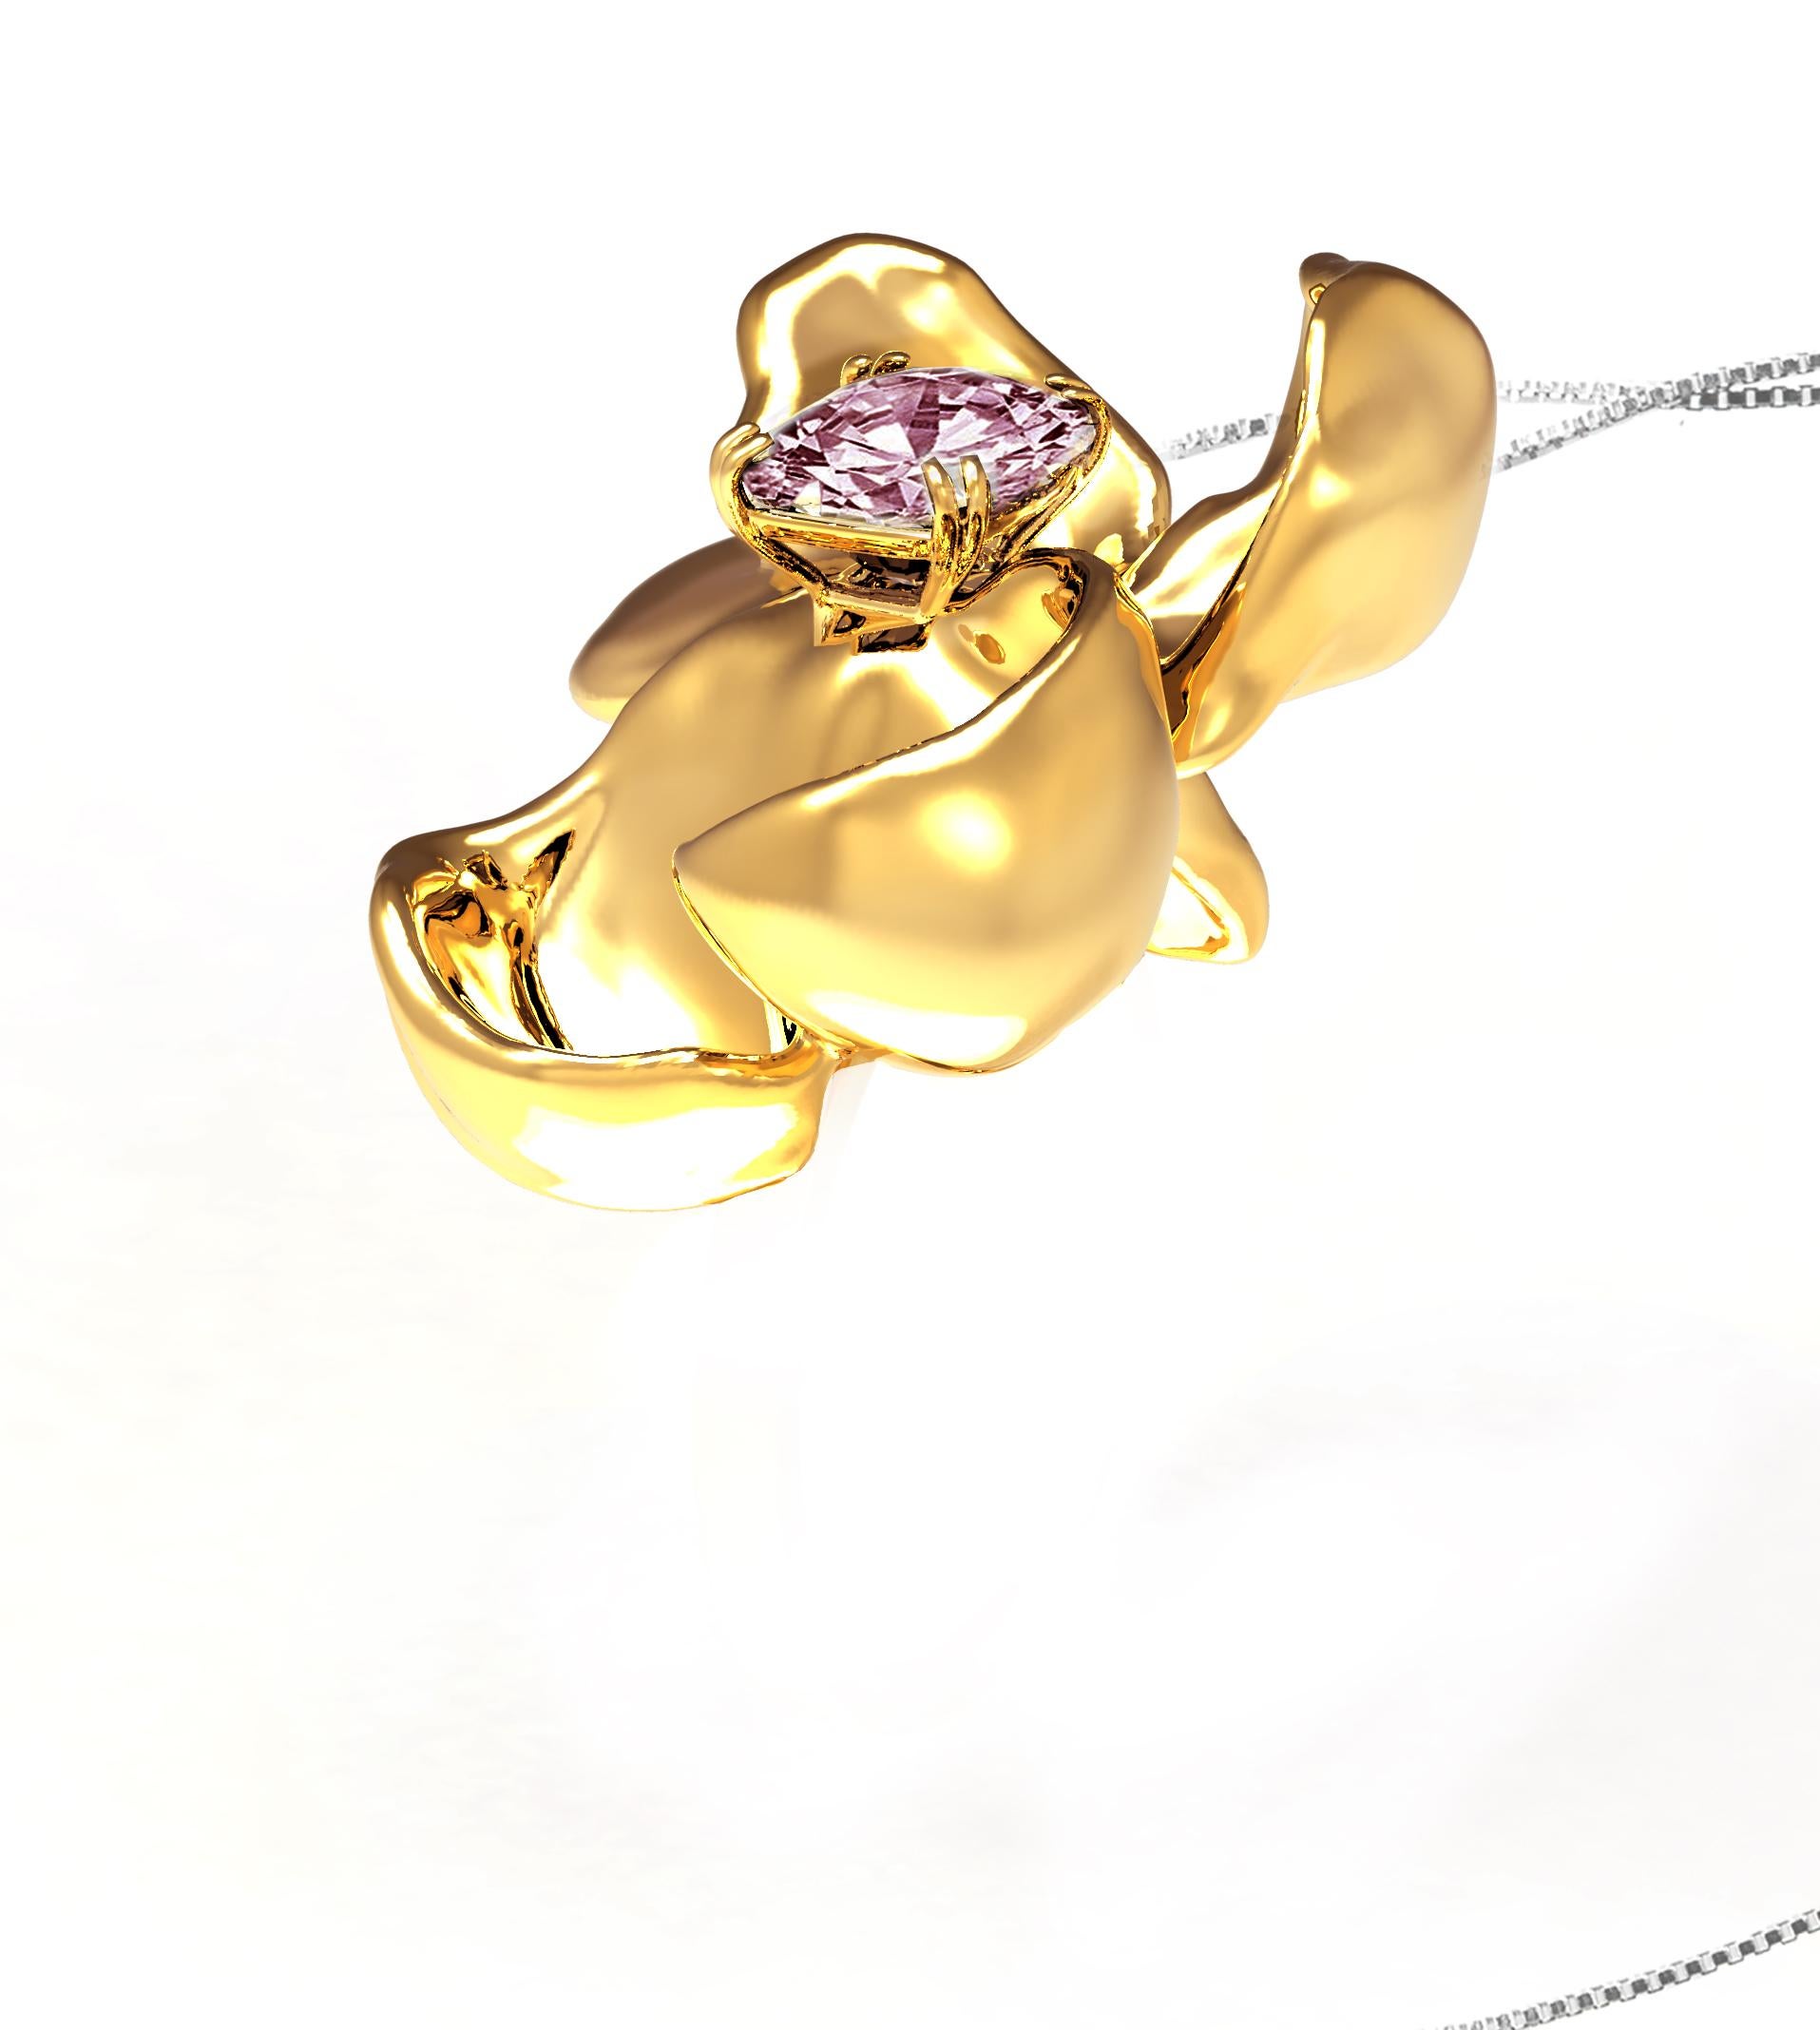 This Magnolia Flower contemporary pendant necklace is made of 18 karat yellow gold with light purple cushion spinel (1.36 carats). The tender water-surface of the spinel multiplies the light, mirroring on the golden petals. The weight of the piece